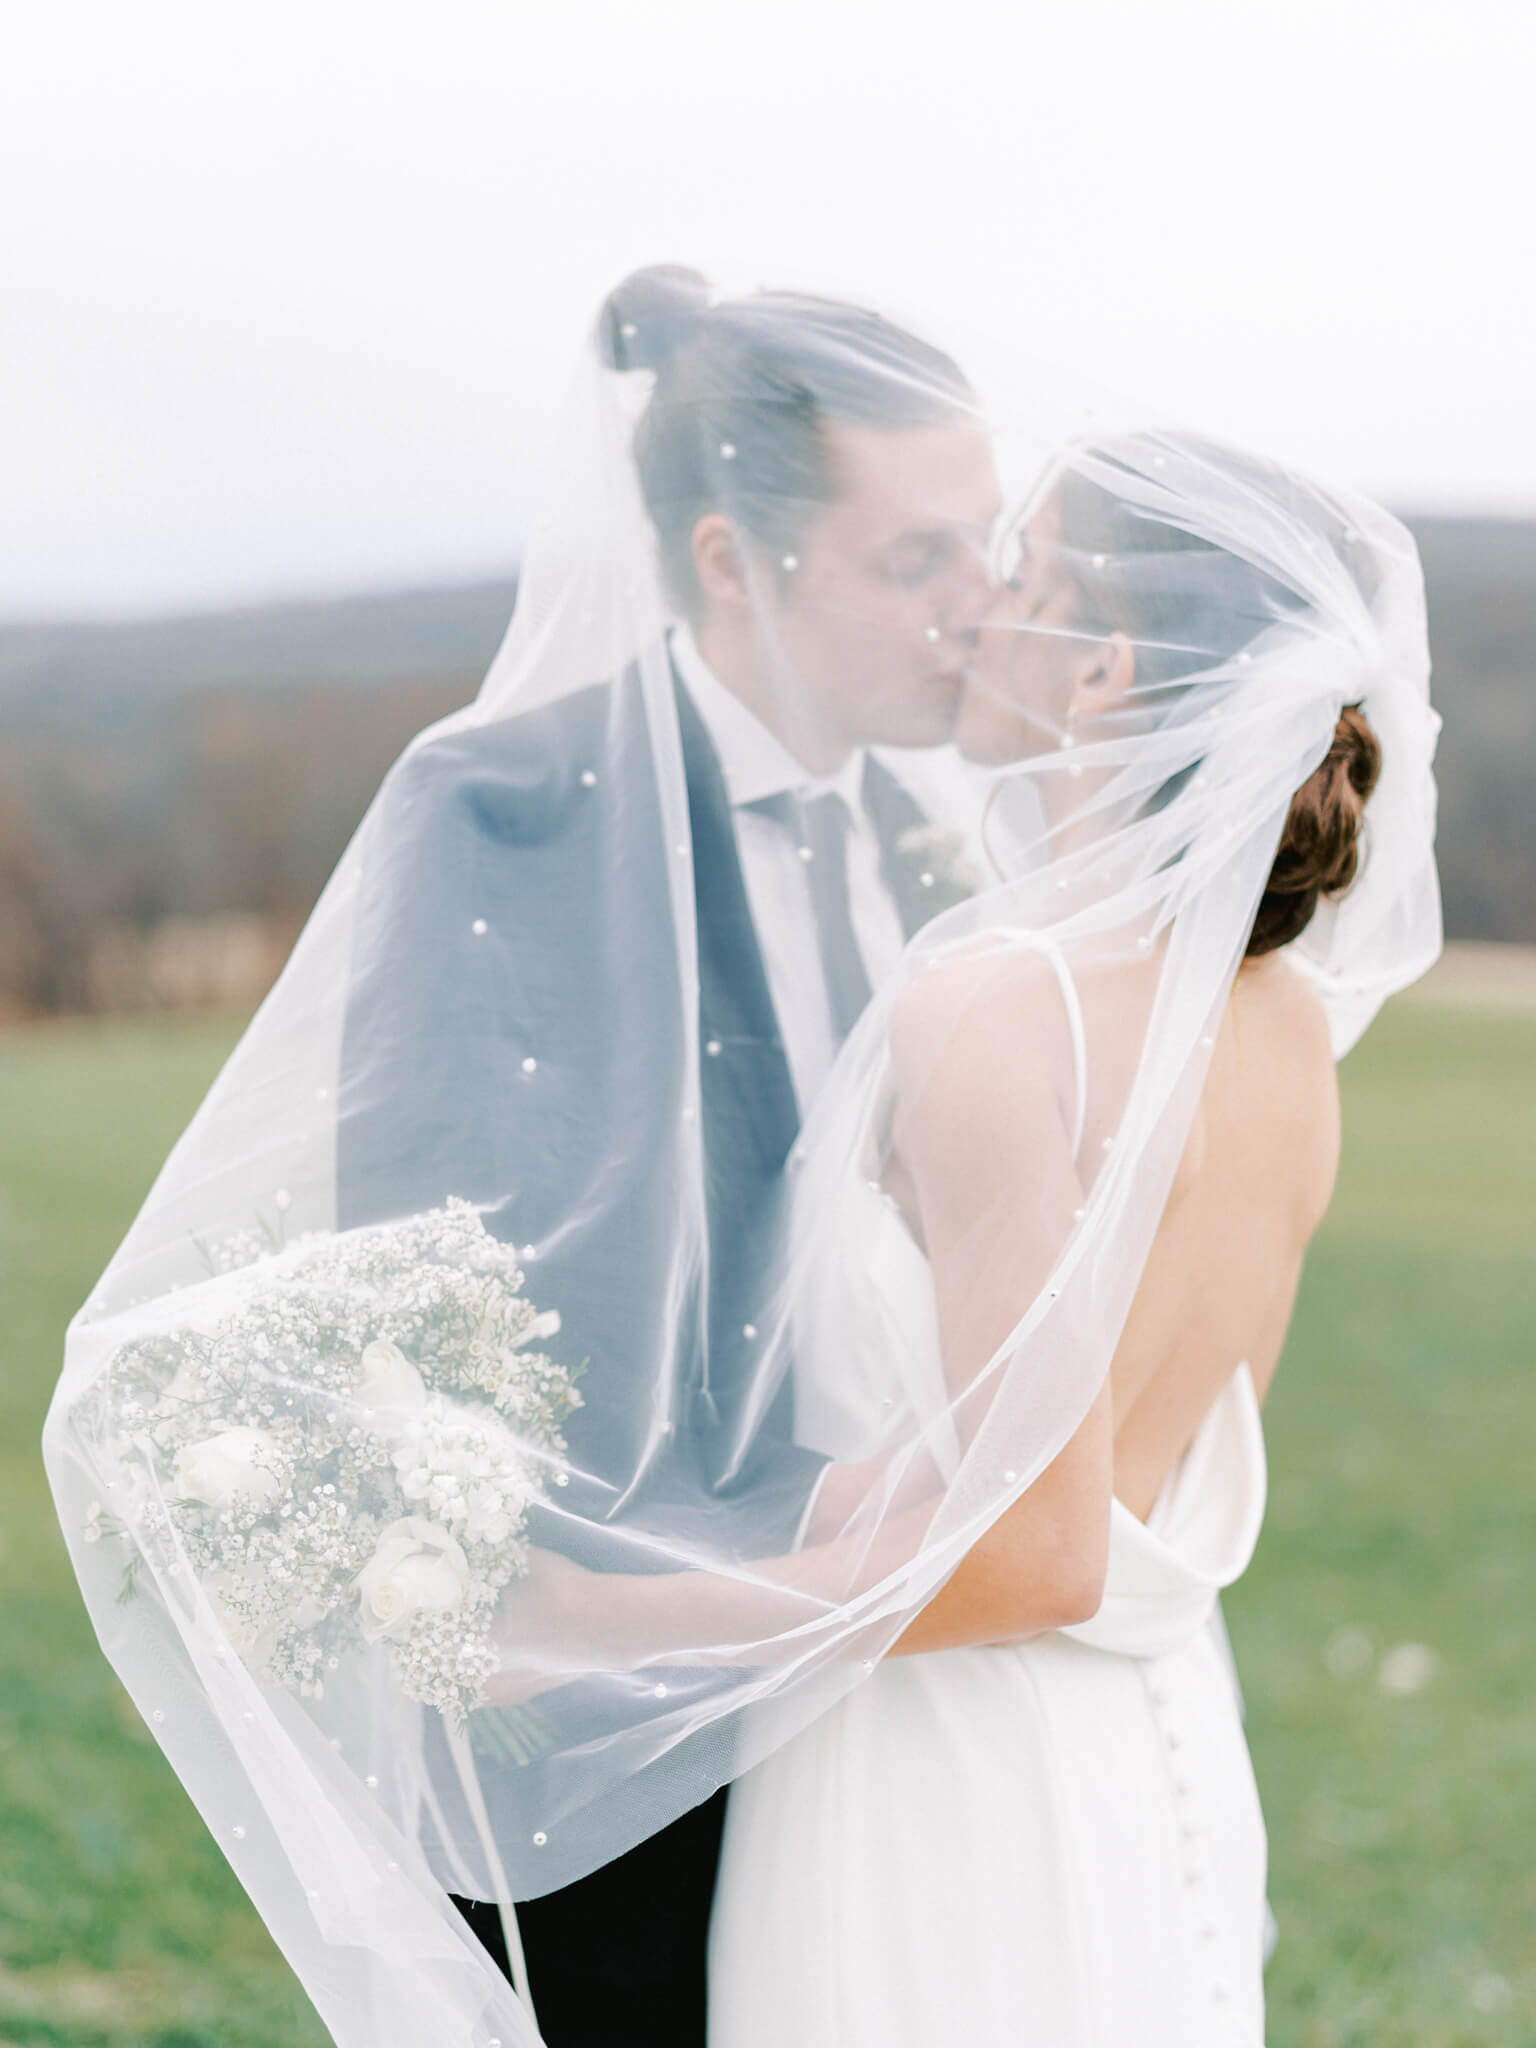 A bride and groom kissing under a white veil with pearls.